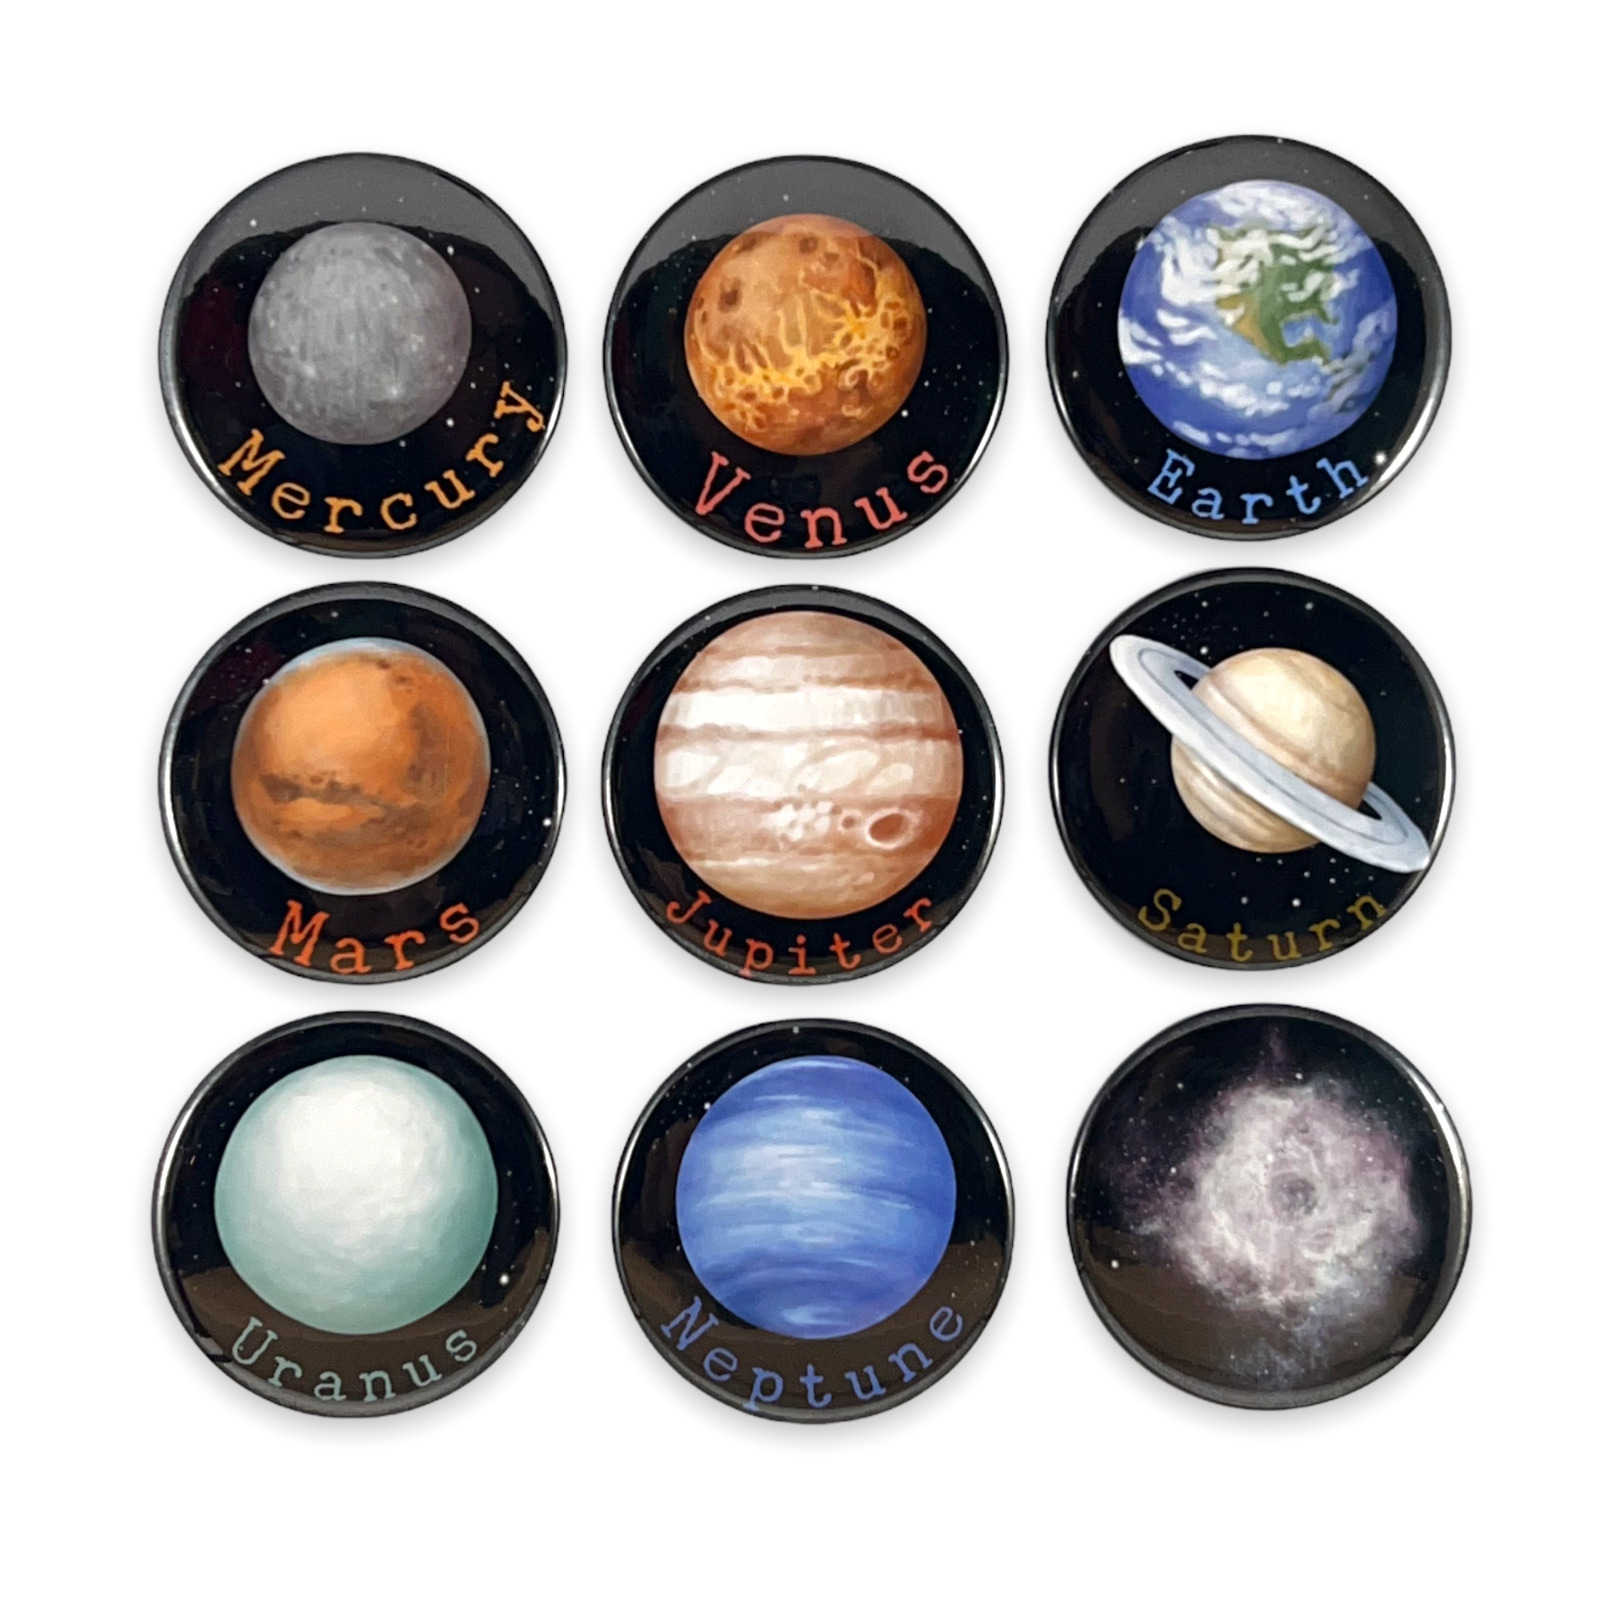 Solar System Planets Set of 9 - 2.25 Inch Magnets for Fridge Whiteboard Galaxy